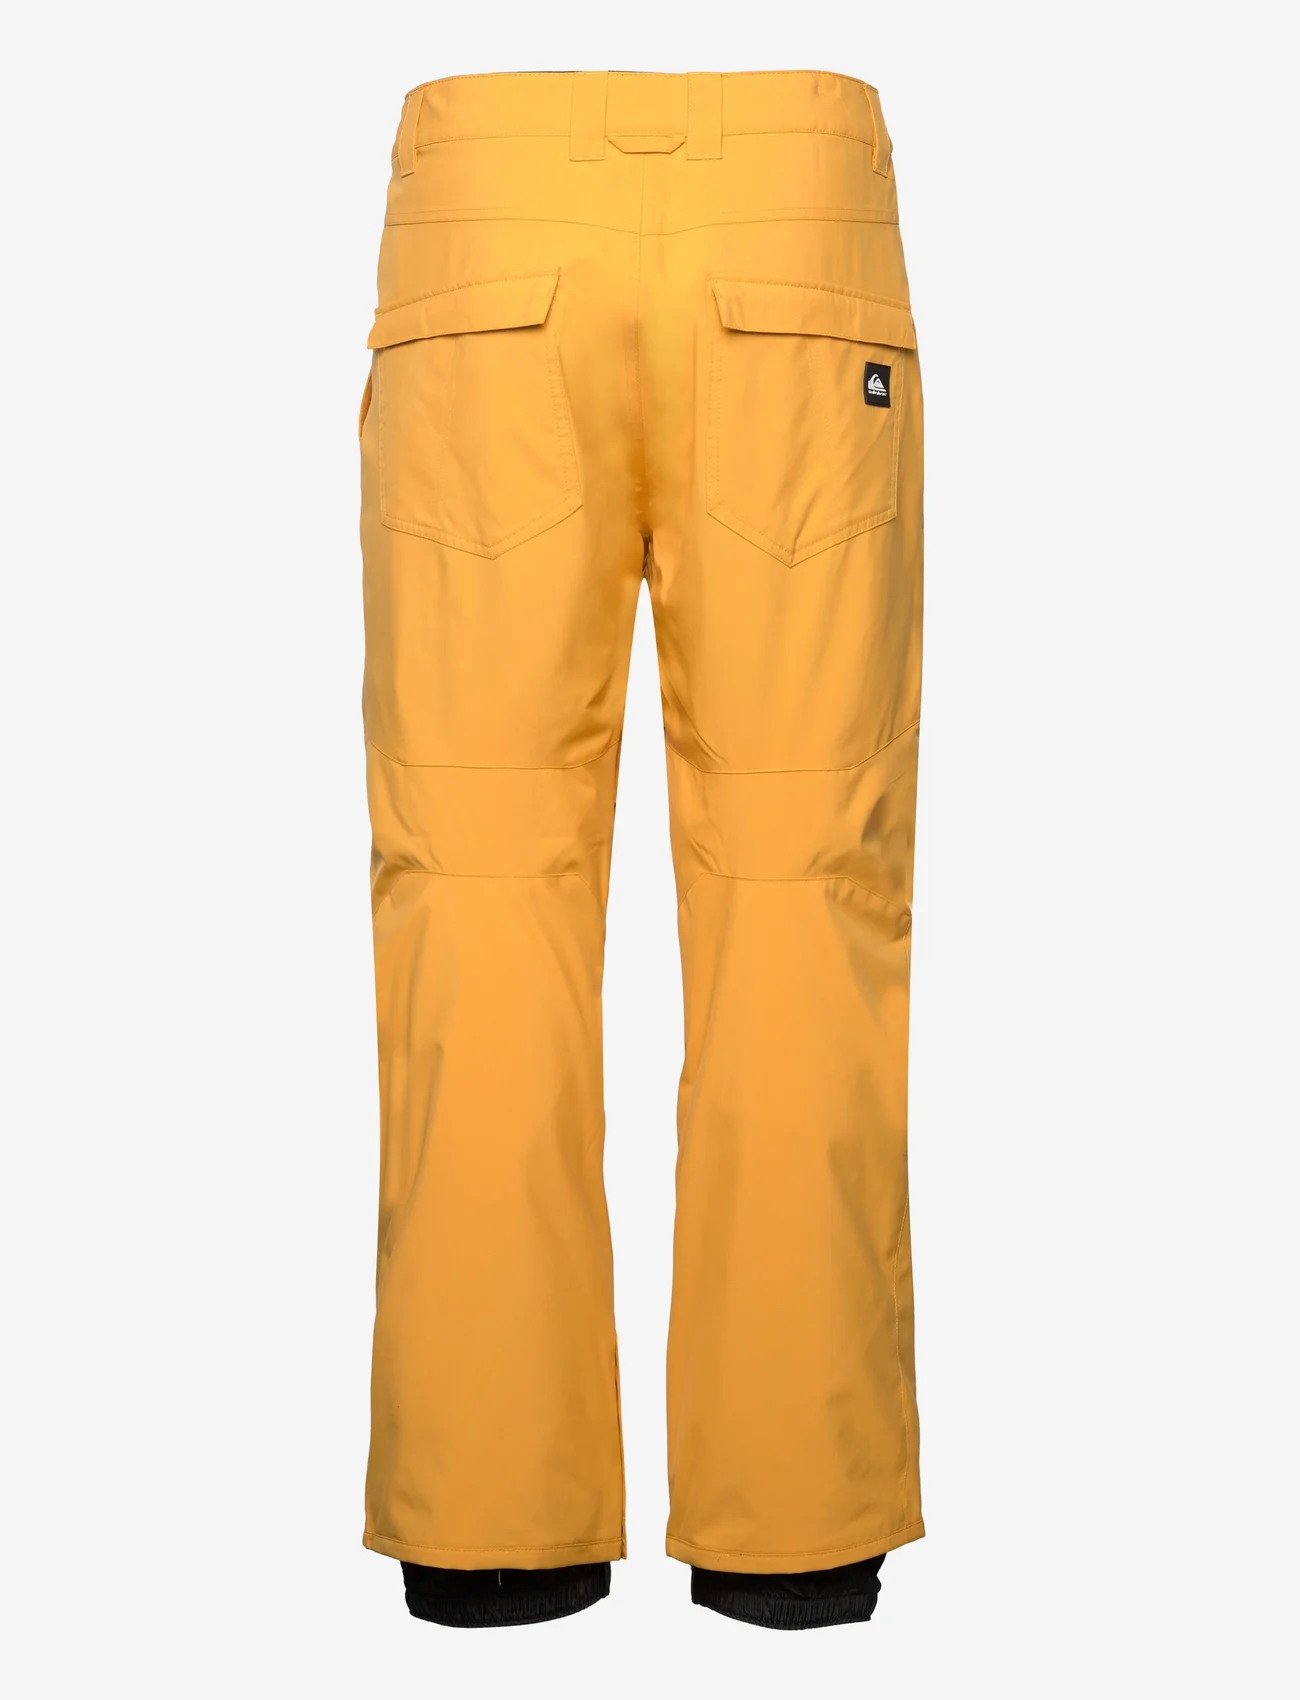 Quiksilver - ESTATE PT - skiing pants - mineral yellow - 1